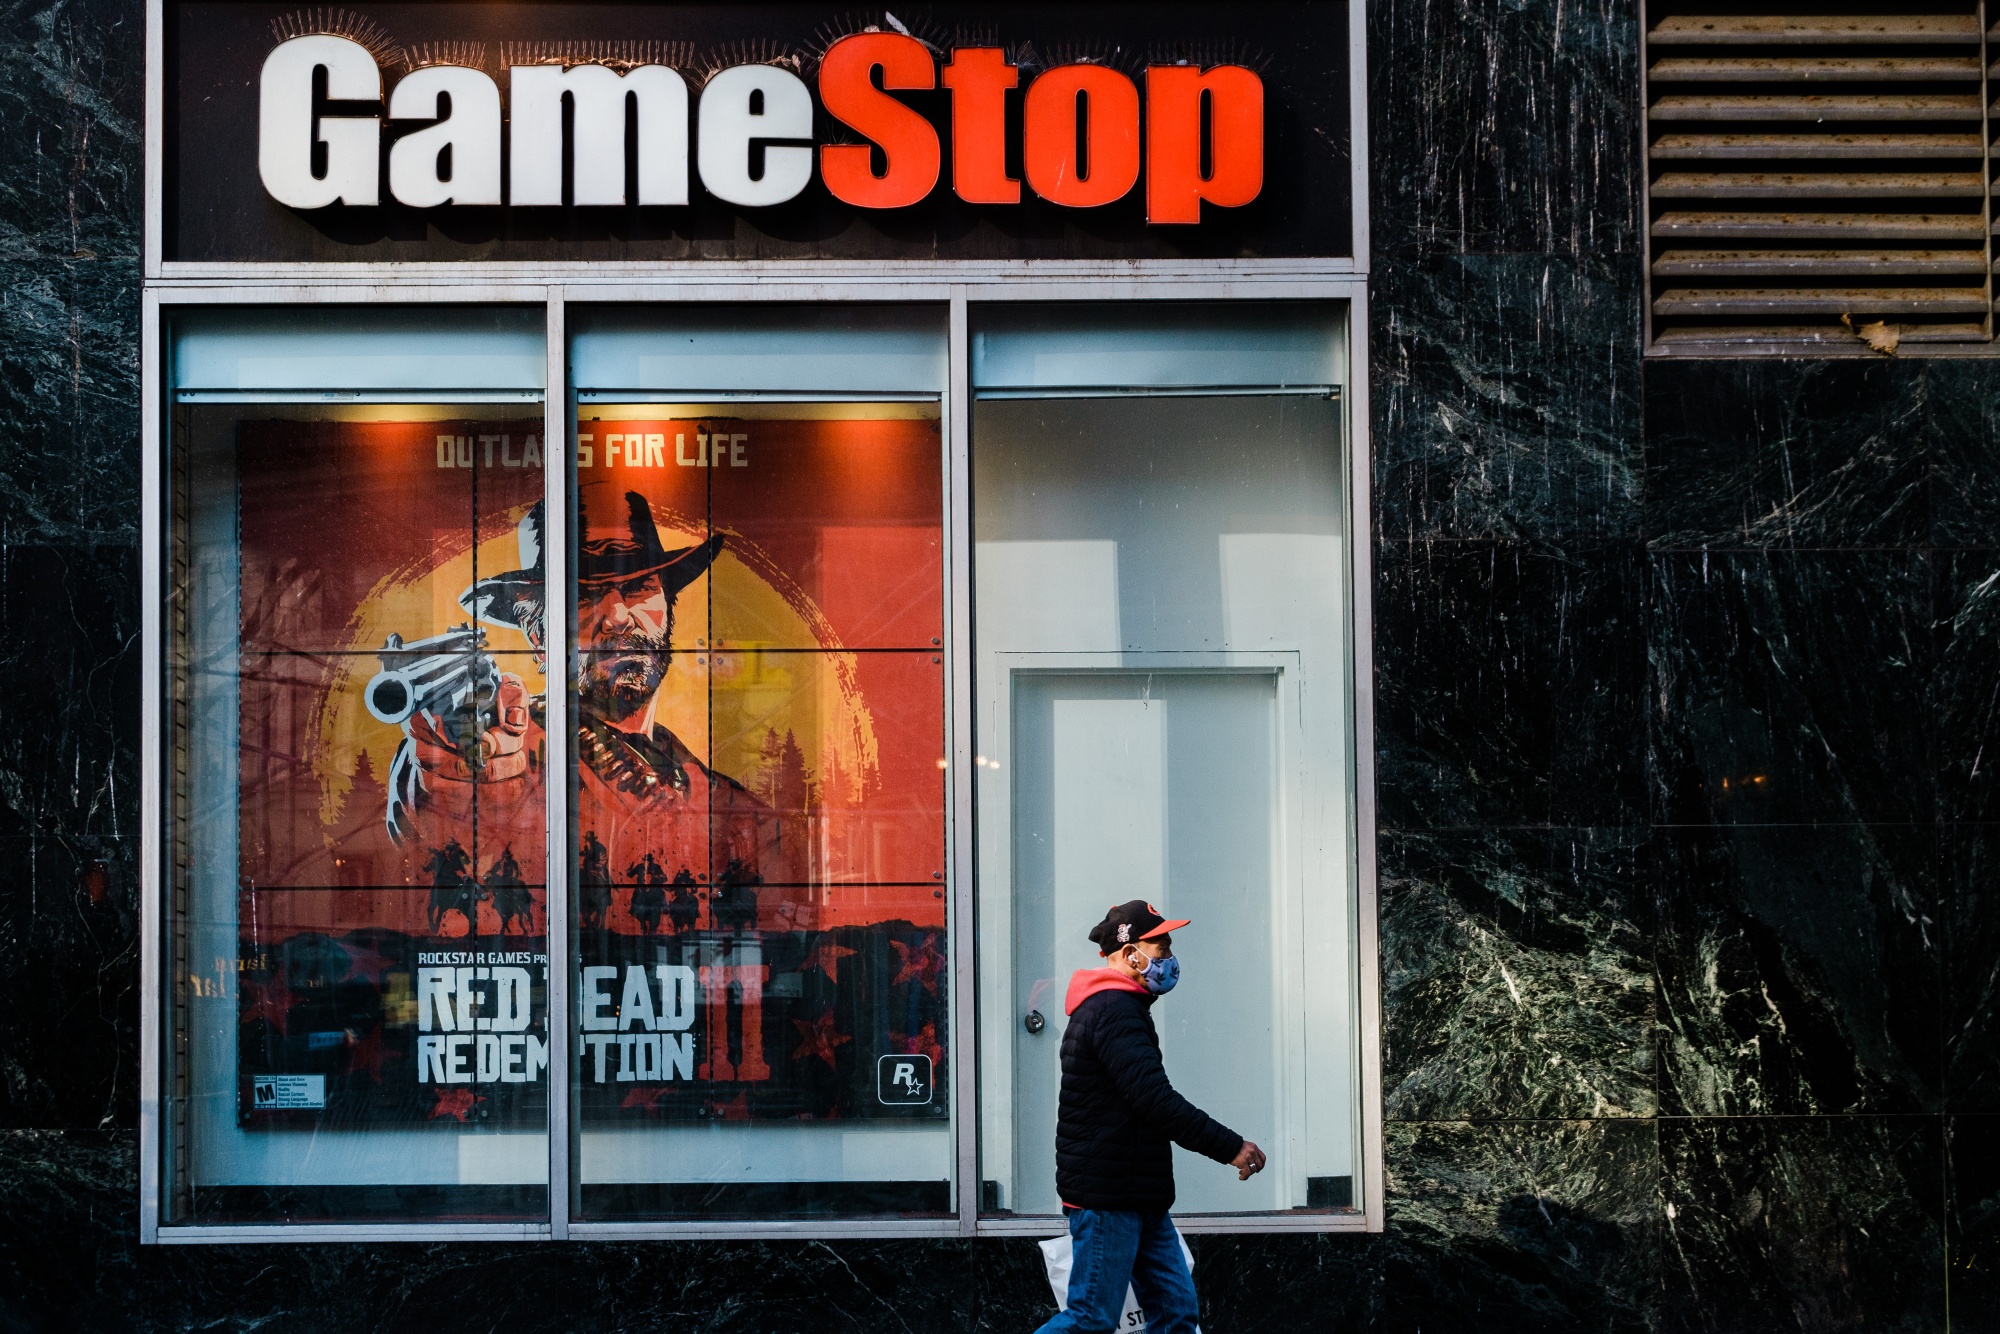 GameStop store in the Herald Square area of New York.